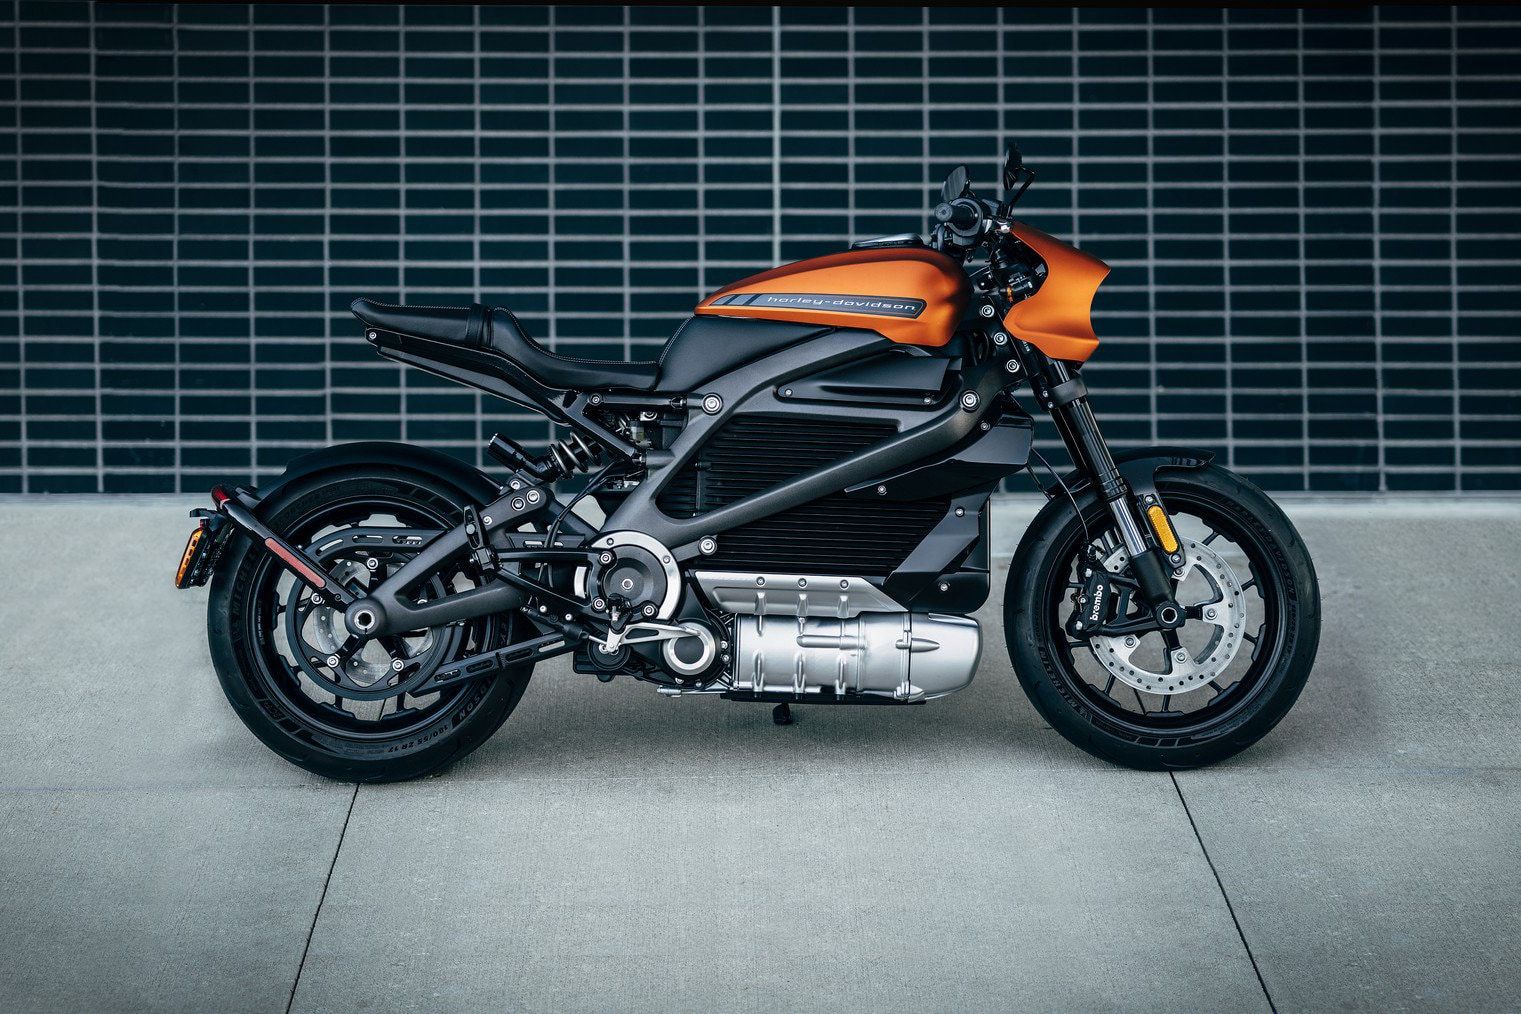 Harley Davidson's Livewire and electric concepts unvieled